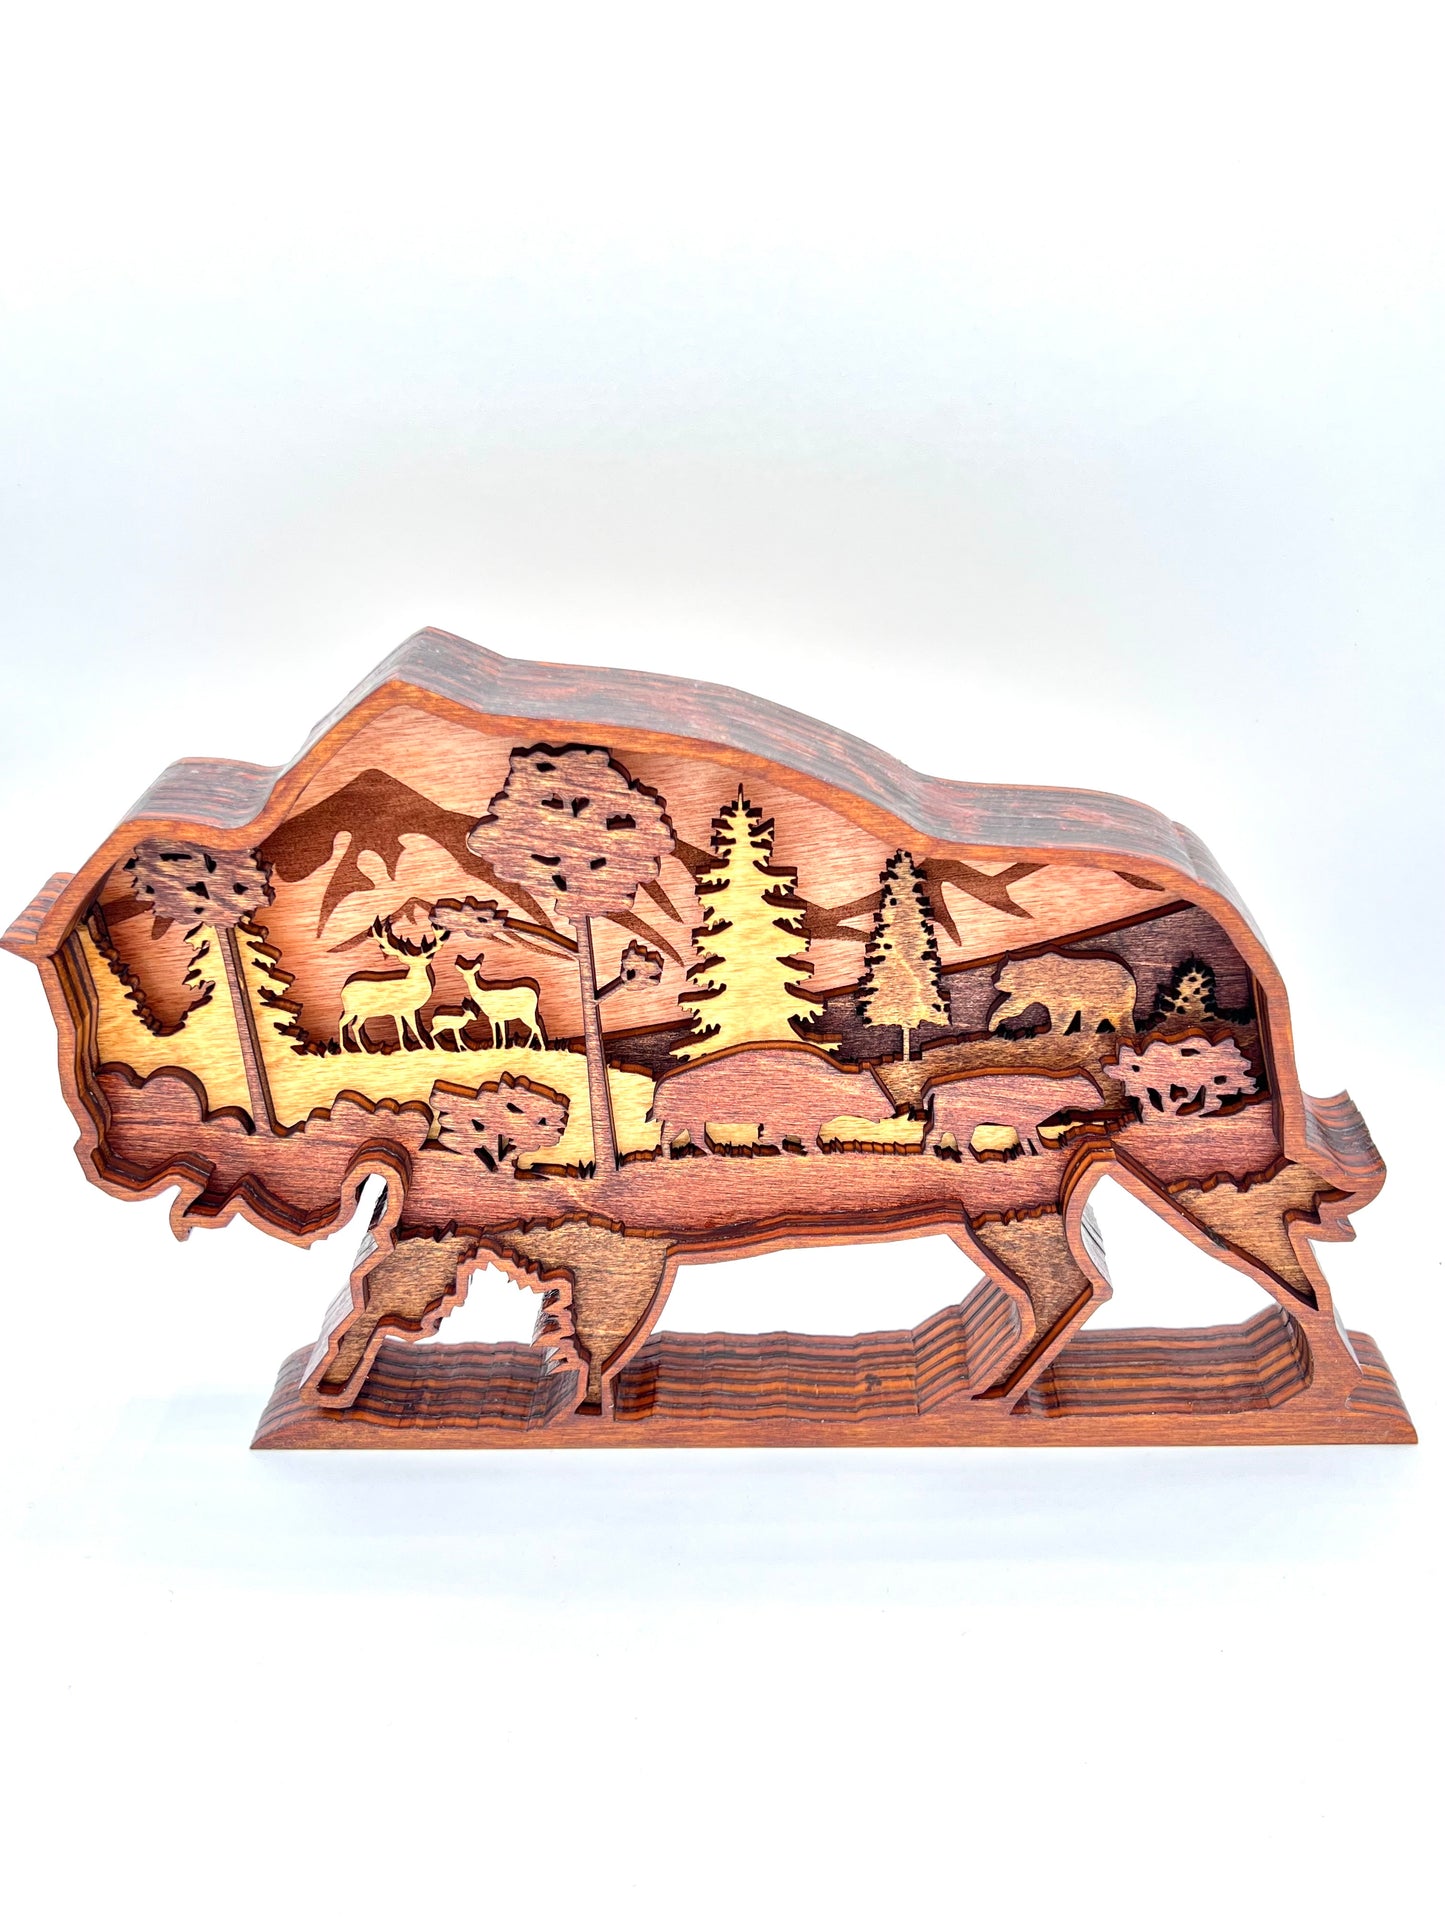 Bison, Multi-Layer Wood Table top Decor